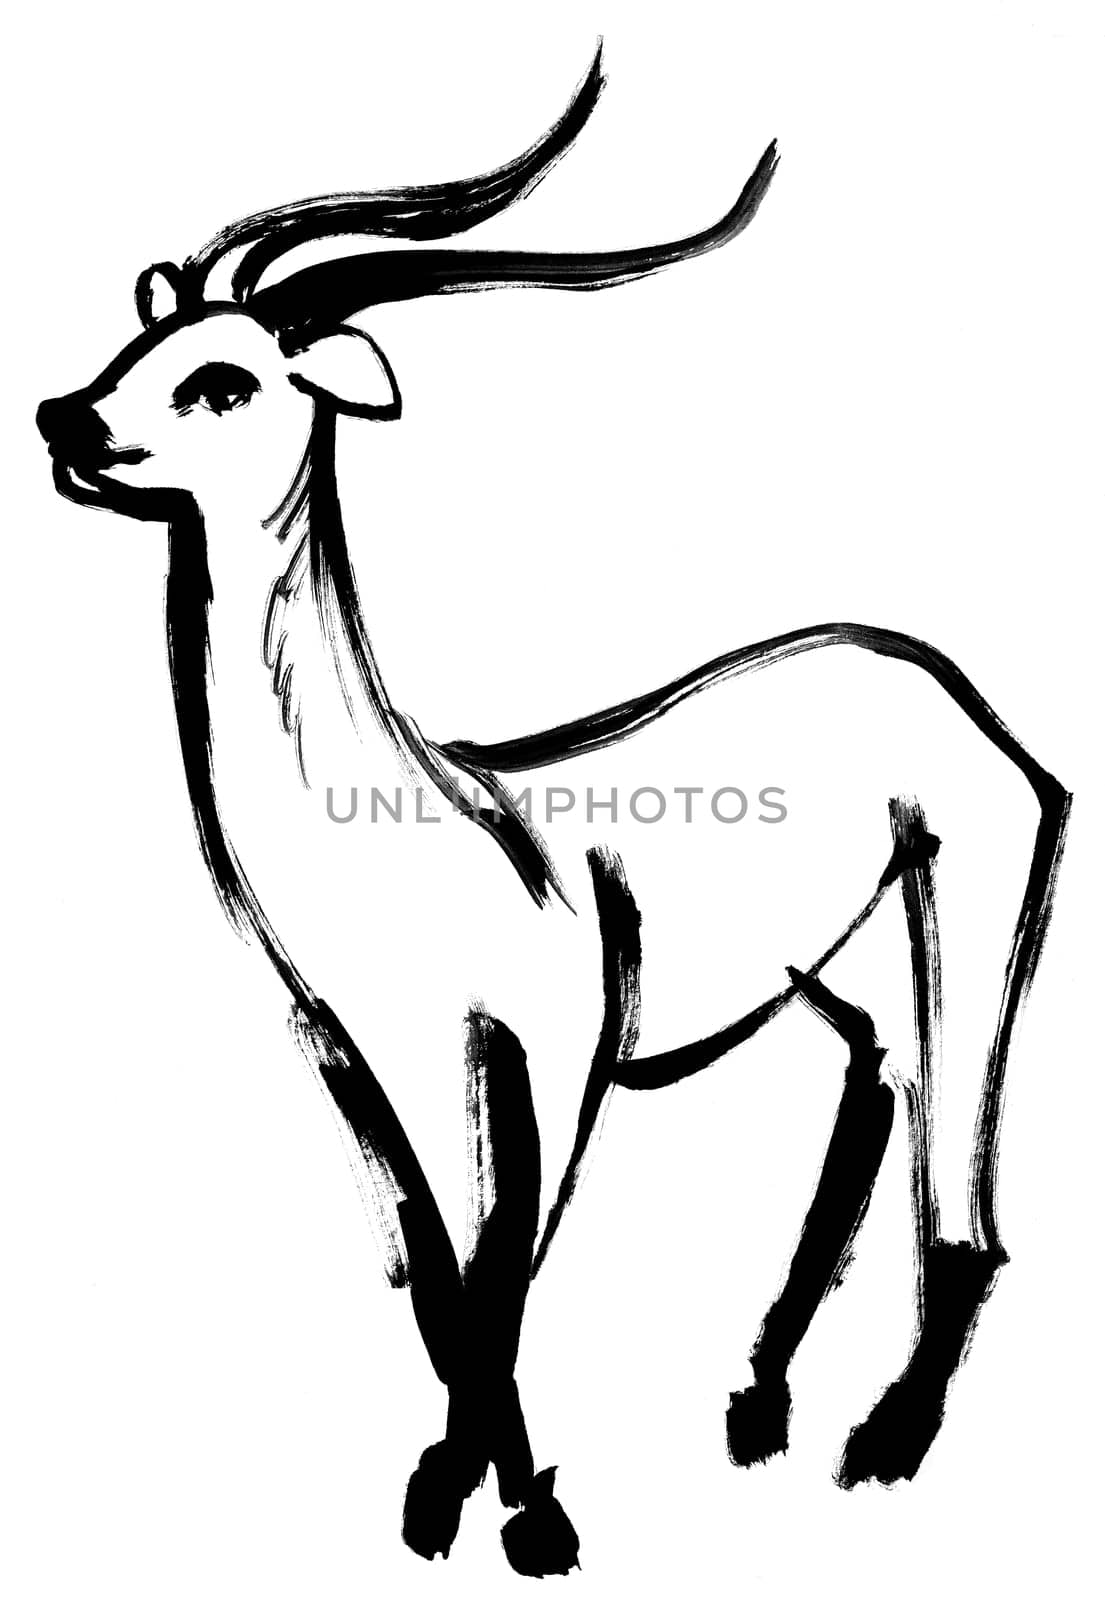 African antelope illustration painted in black gouache isolated on white paper in drybrush technique for design and other